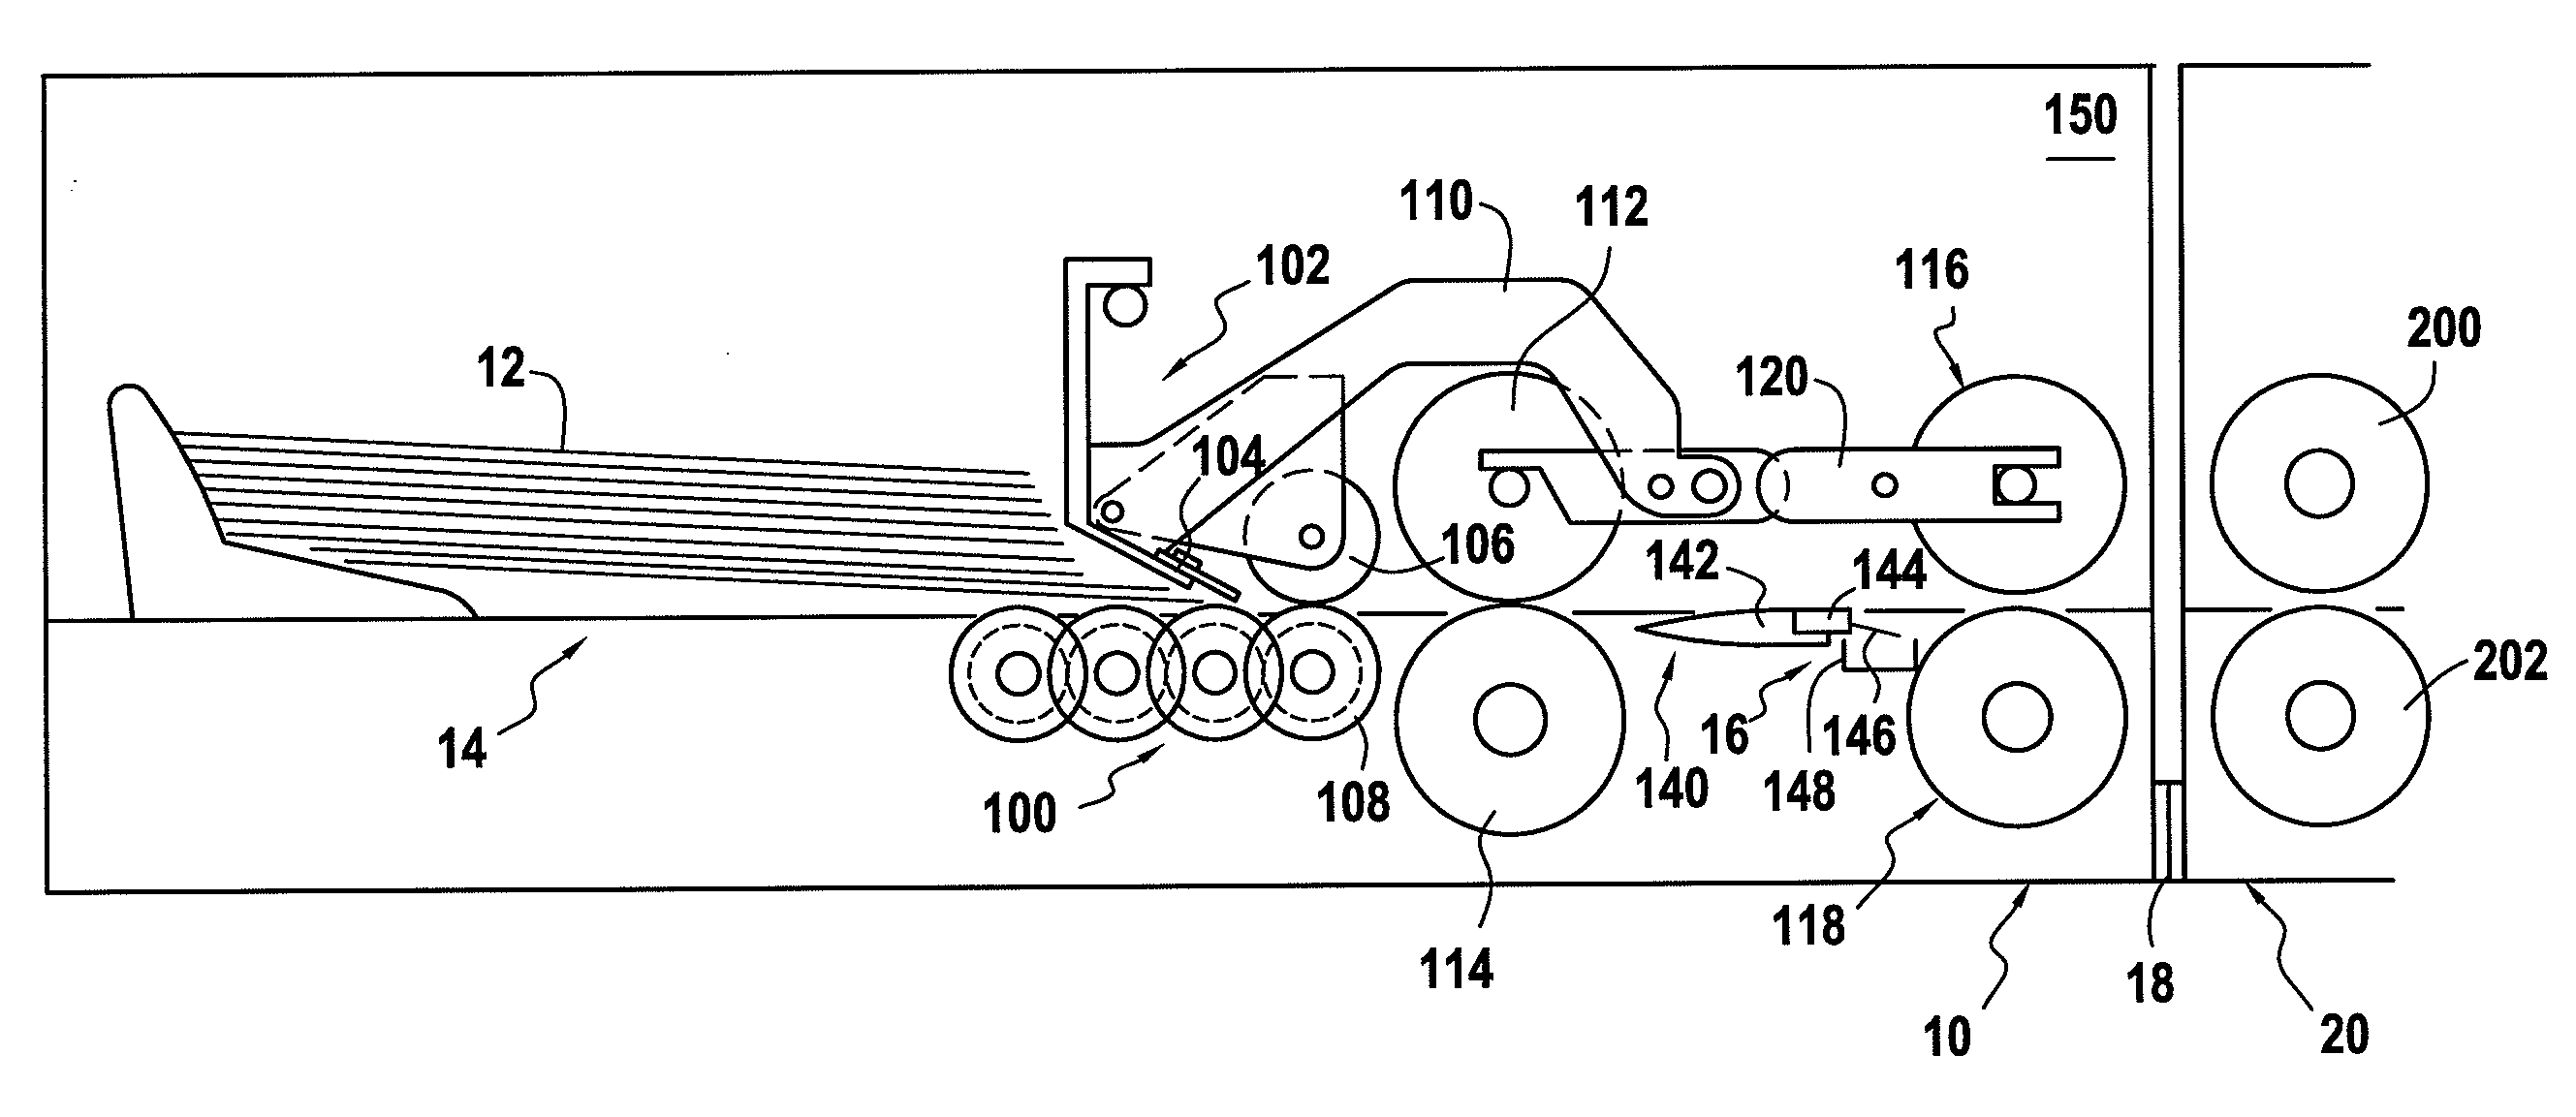 Feed module including an envelope closure device that retains water